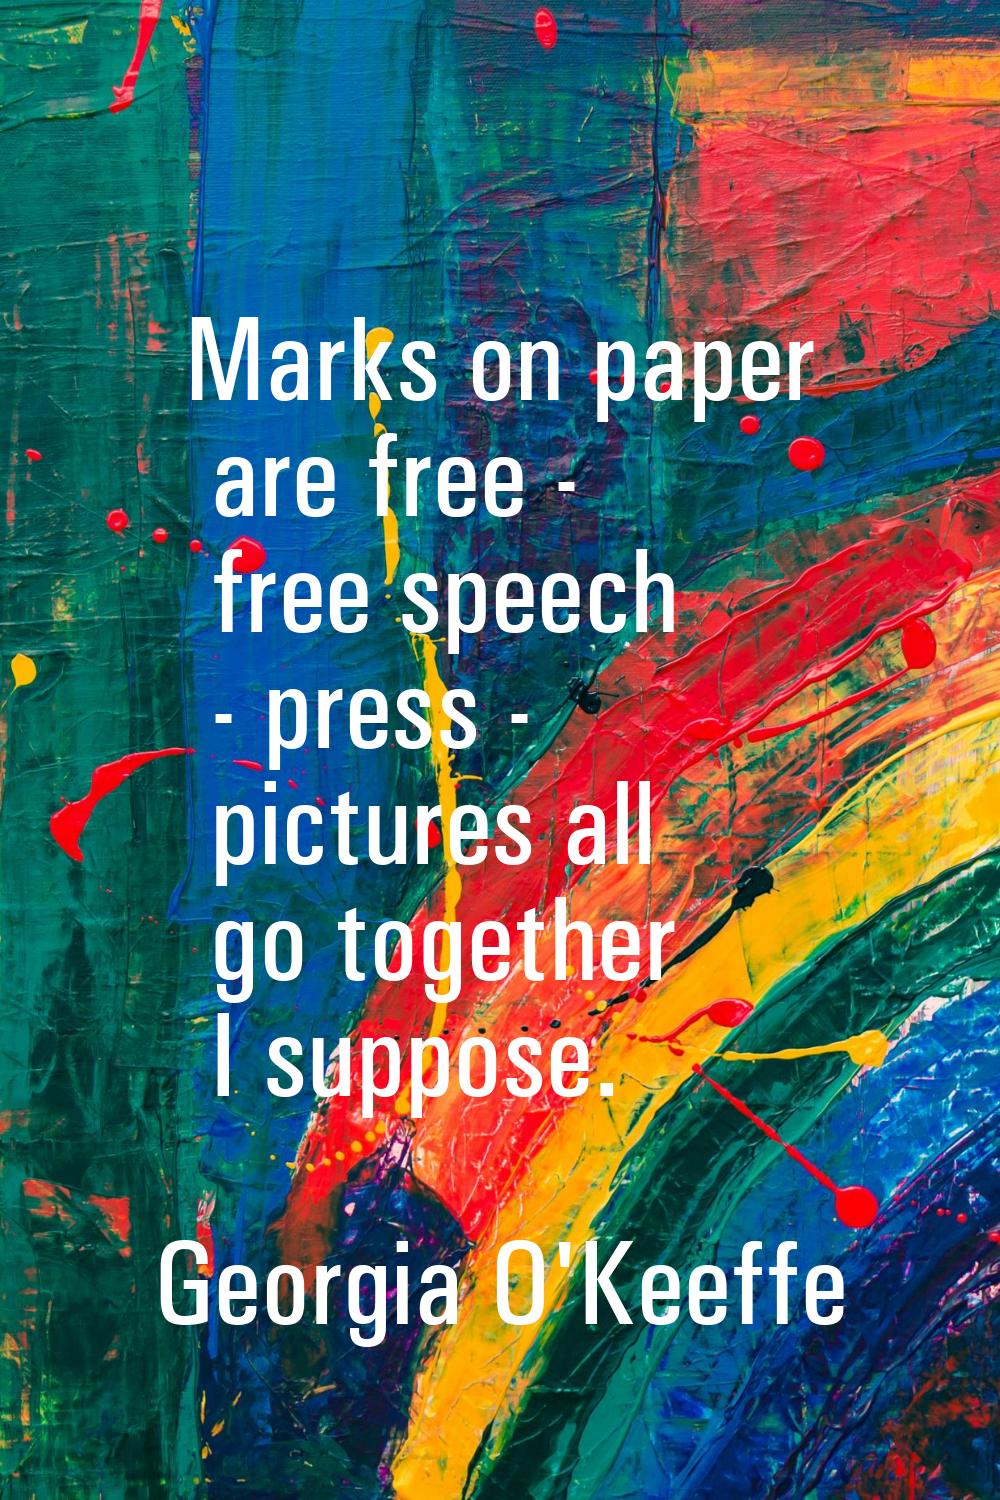 Marks on paper are free - free speech - press - pictures all go together I suppose.